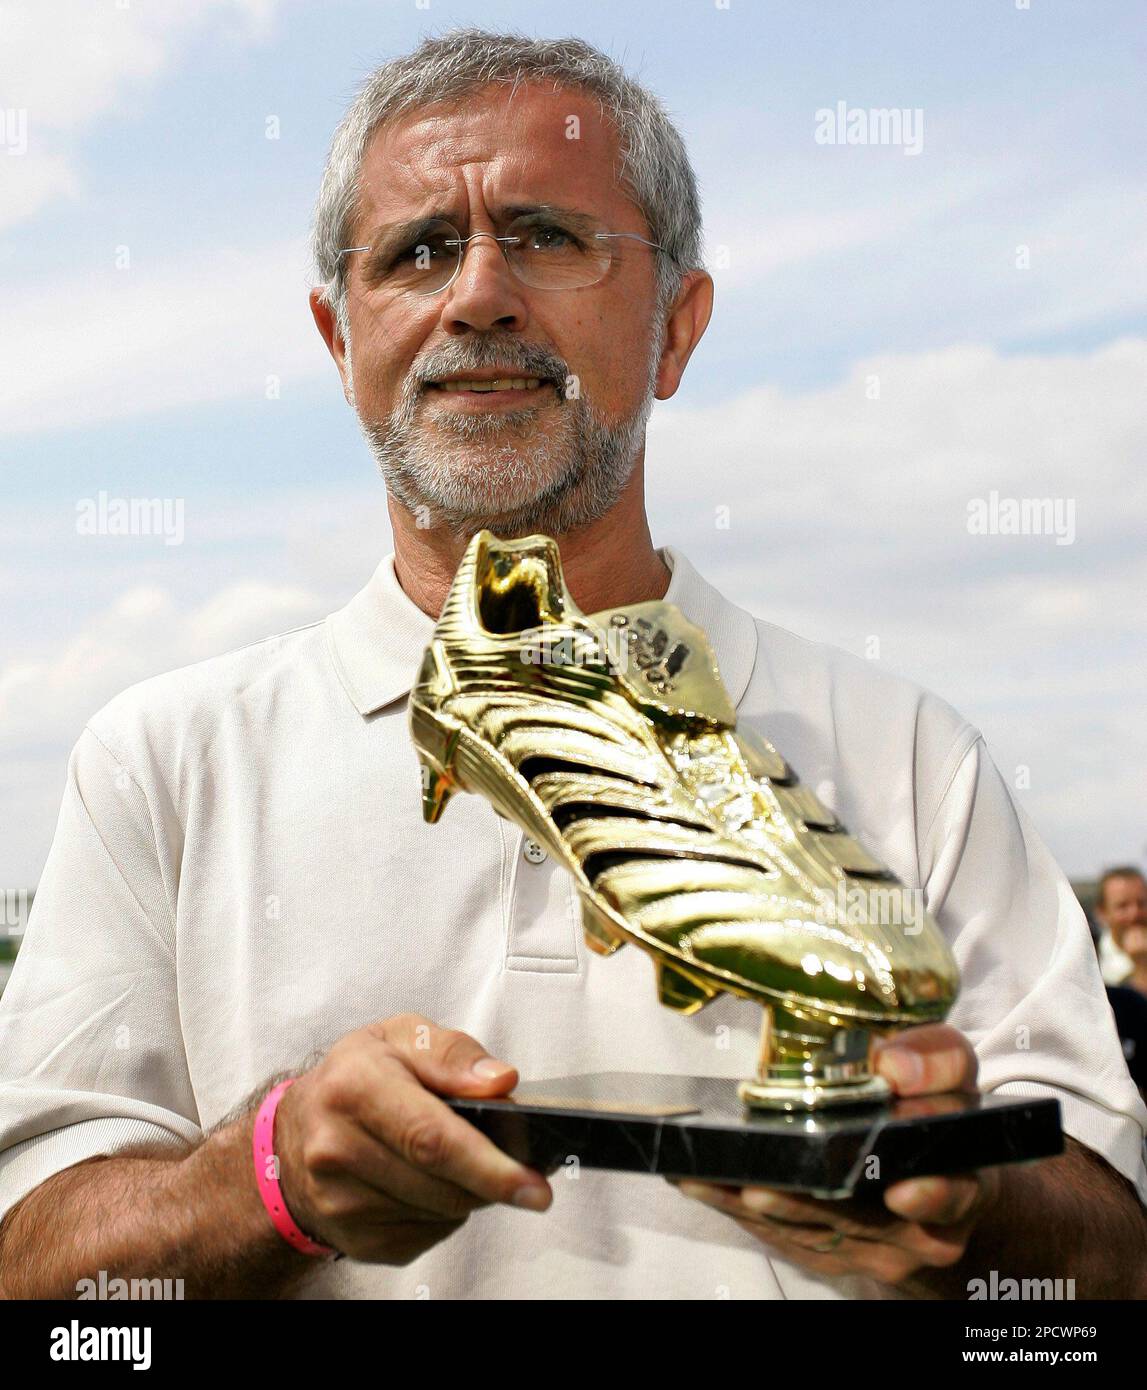 Former German soccer player Gerd Mueller presents the Golden Boot Trophy to  the media at the "adidas World of Football" in Berlin, Thursday, June 29,  2006. The adidas Golden boot is the